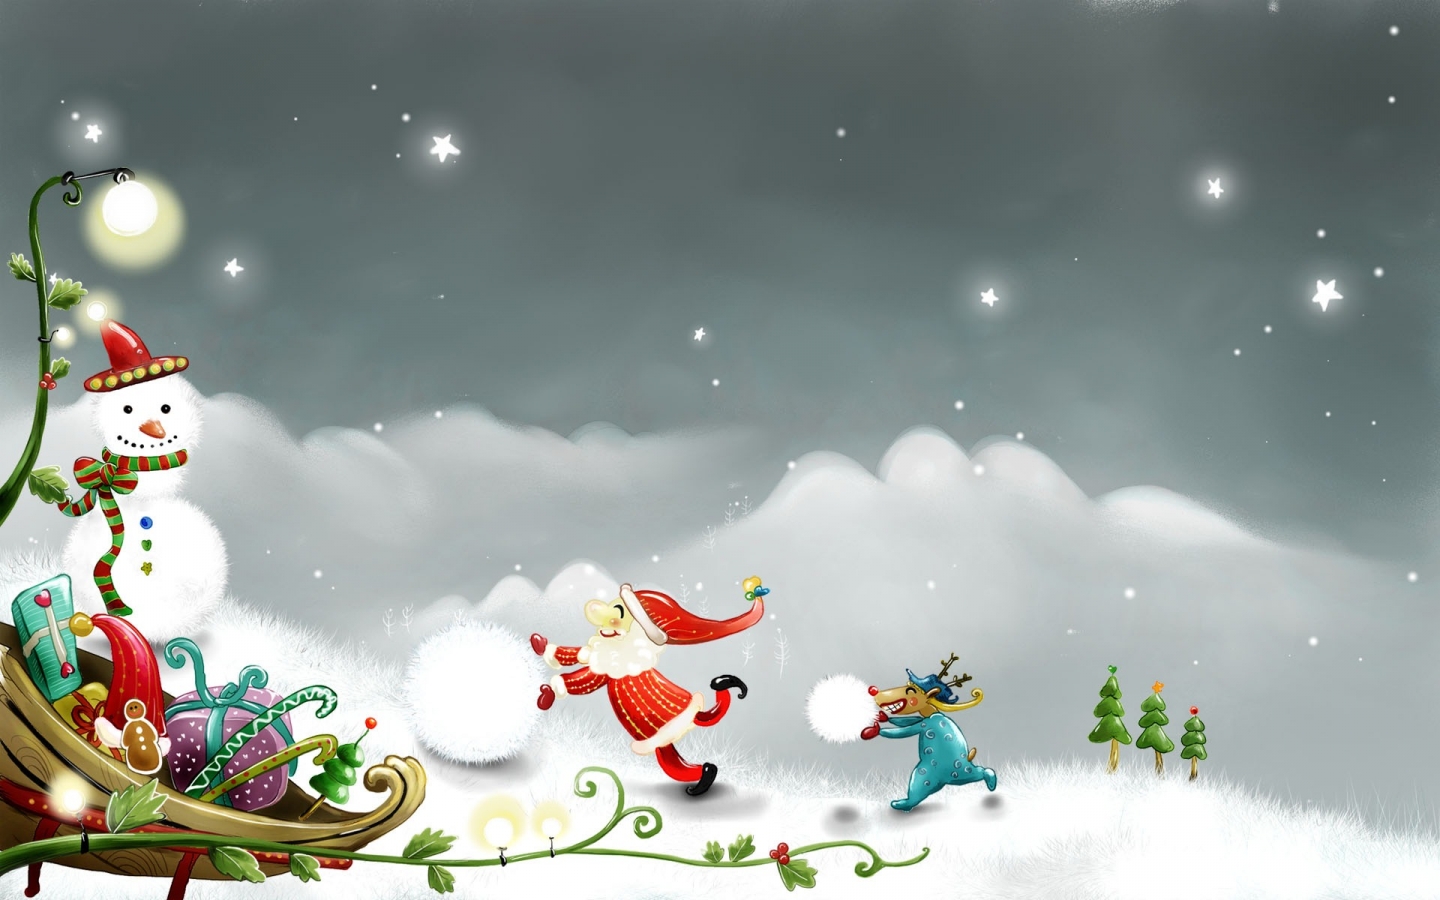 Snowman and Santa Claus for 1440 x 900 widescreen resolution